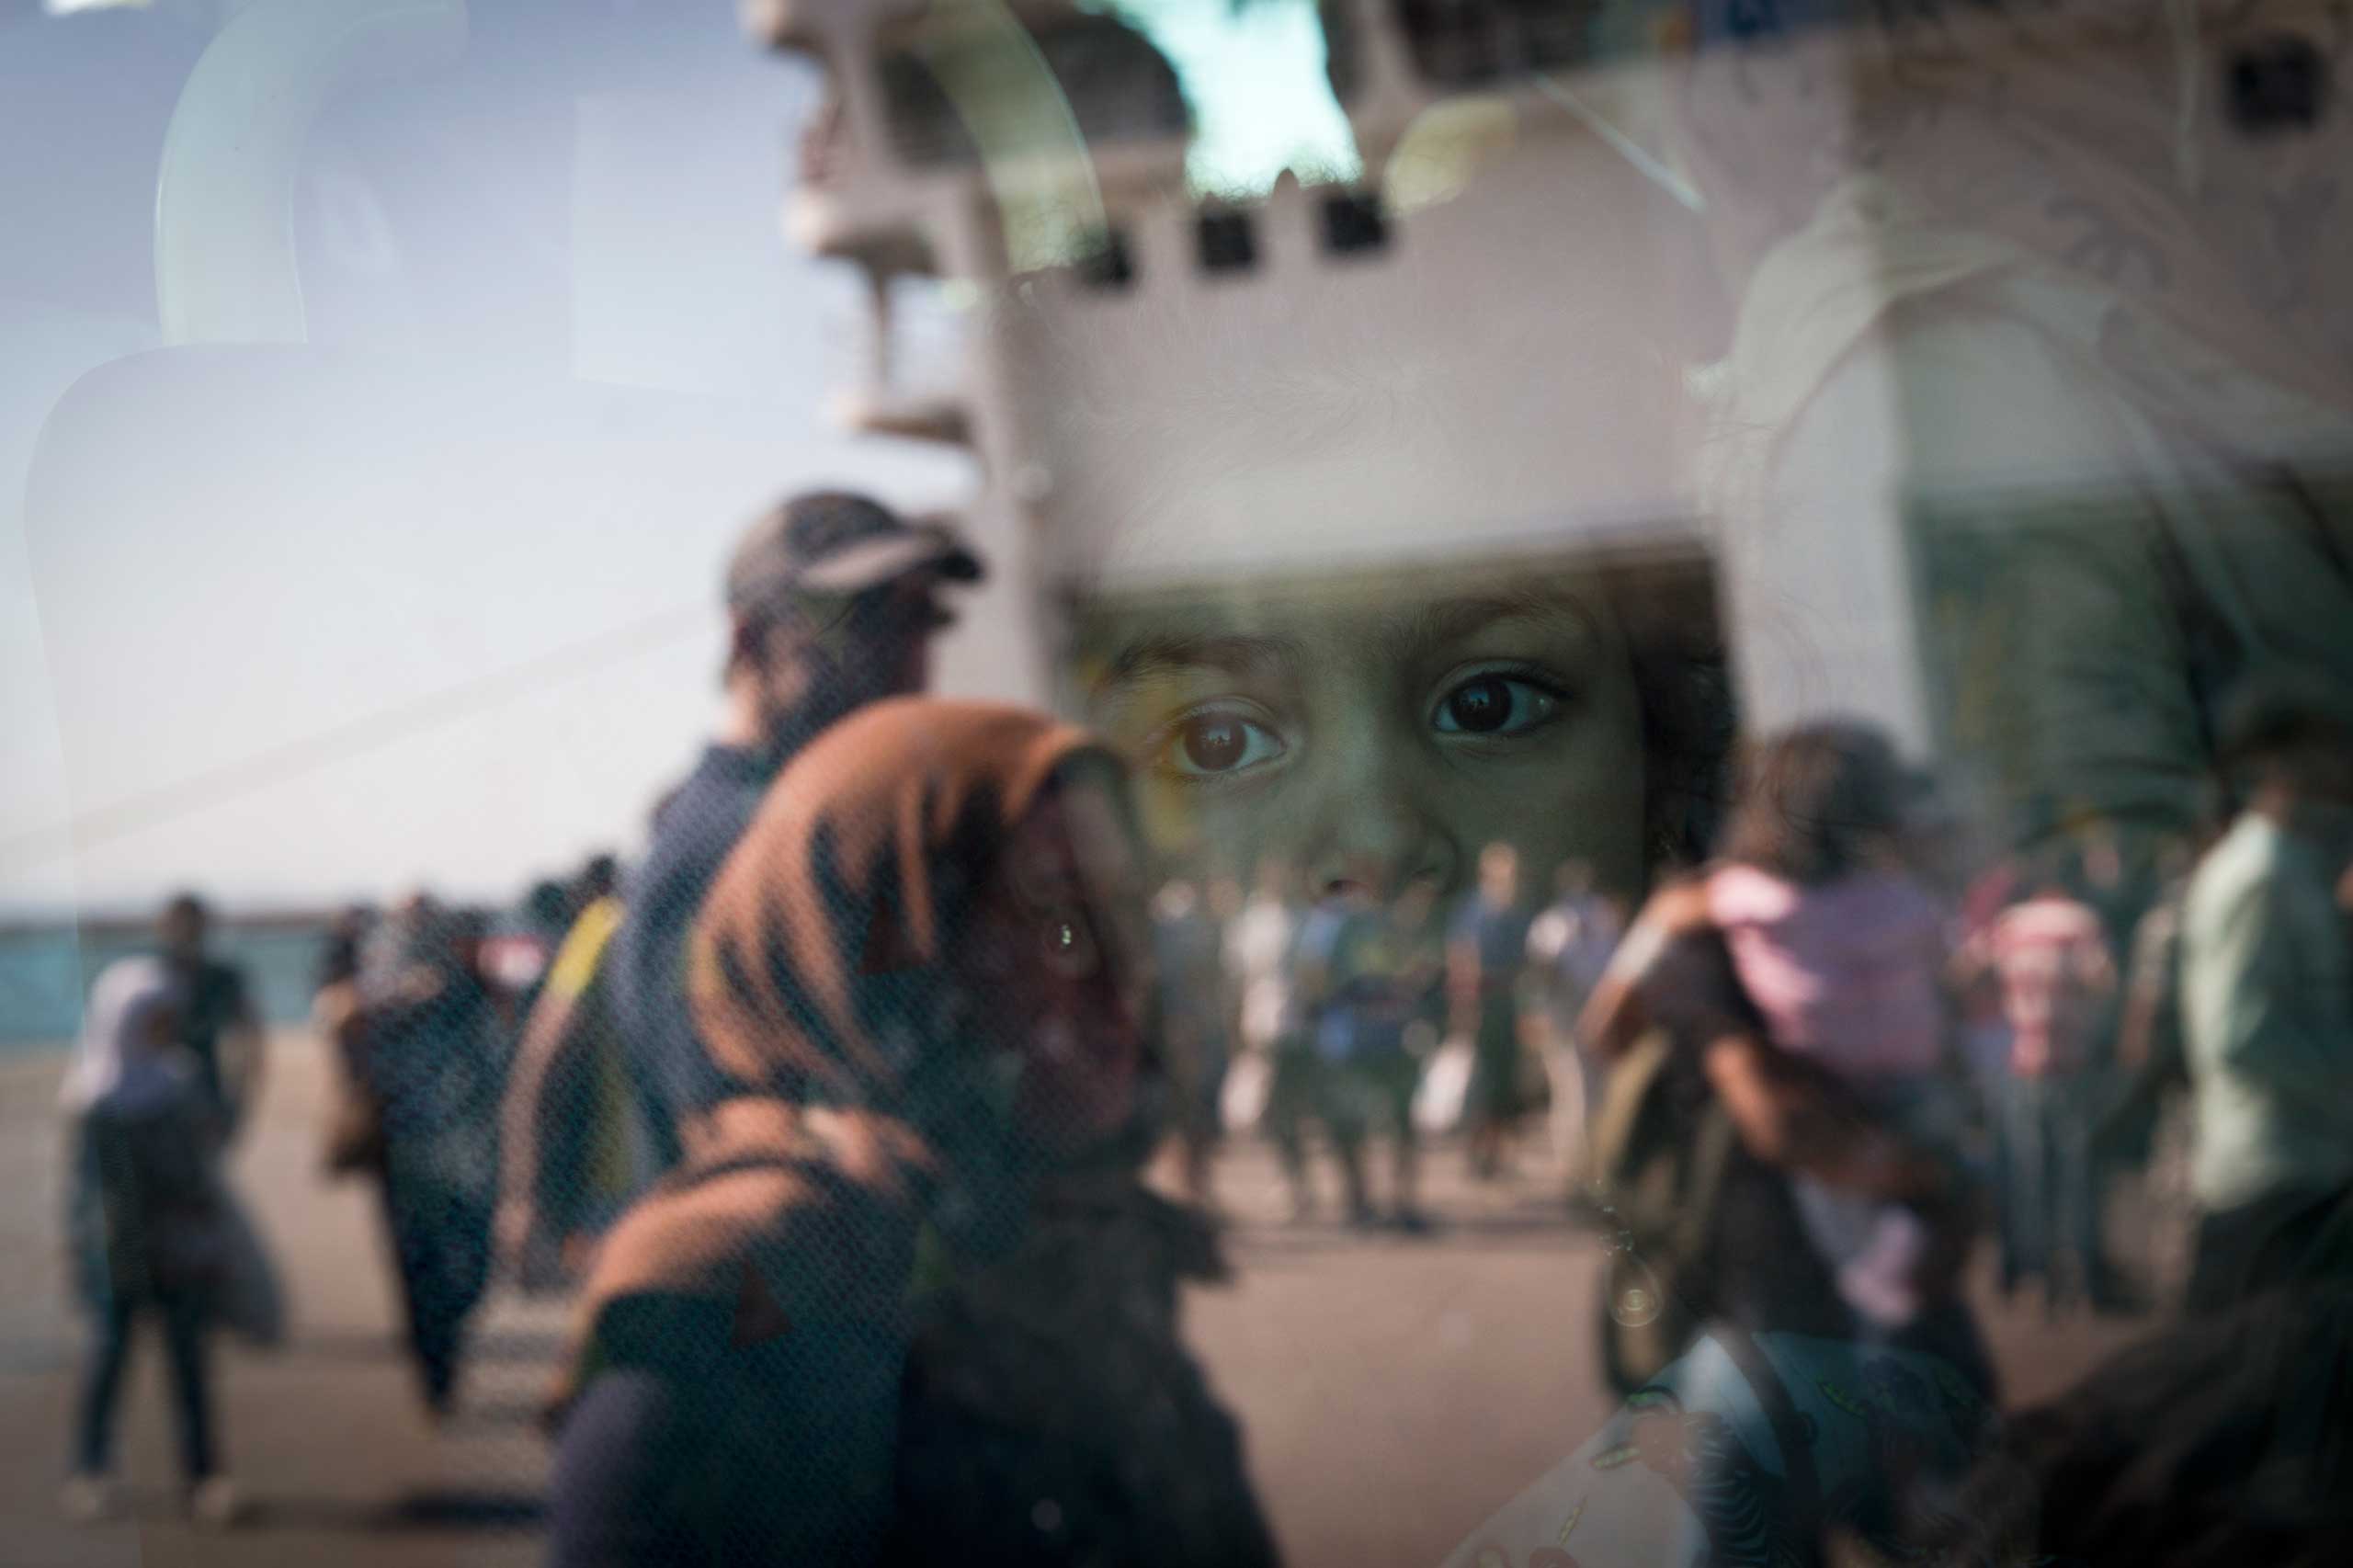 A little girl from Syria looks out of a bus as the ferry she arrived in is reflected in the bus window at the port of Piraeus, Greece, on Aug. 25, 2015.